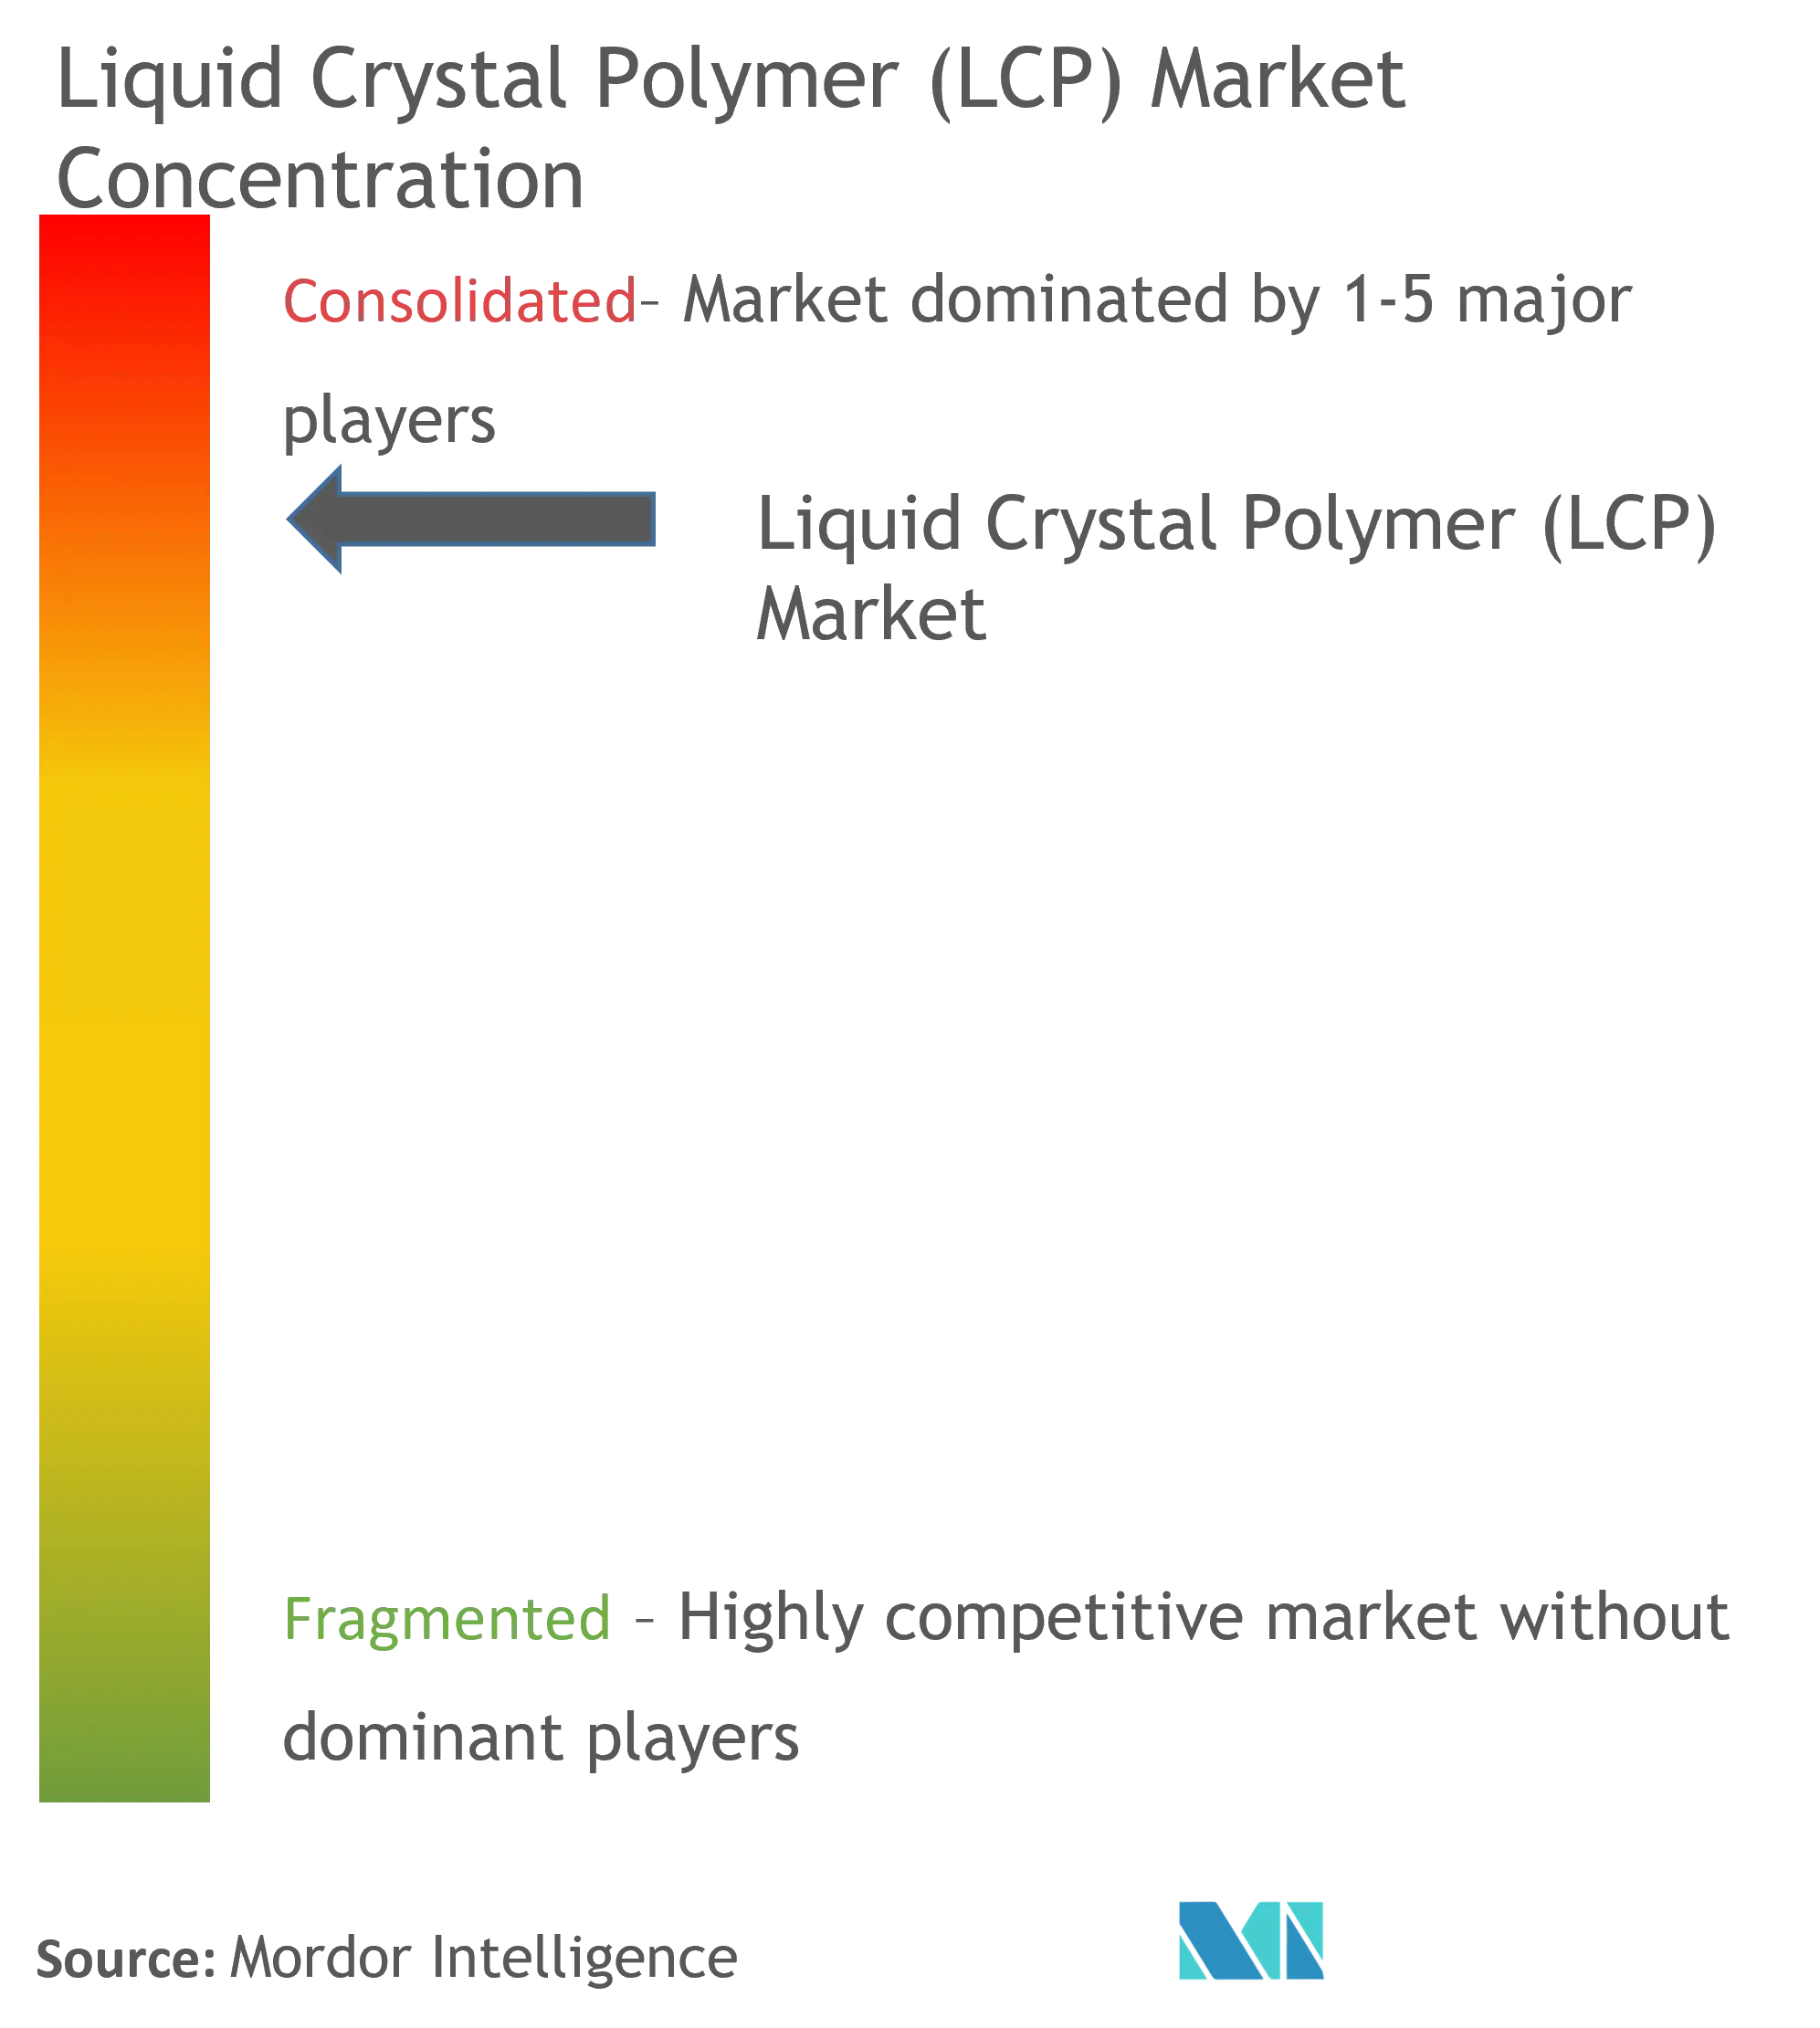 Market Concentration - Liquid Crystal Polymer (LCP) Market.png